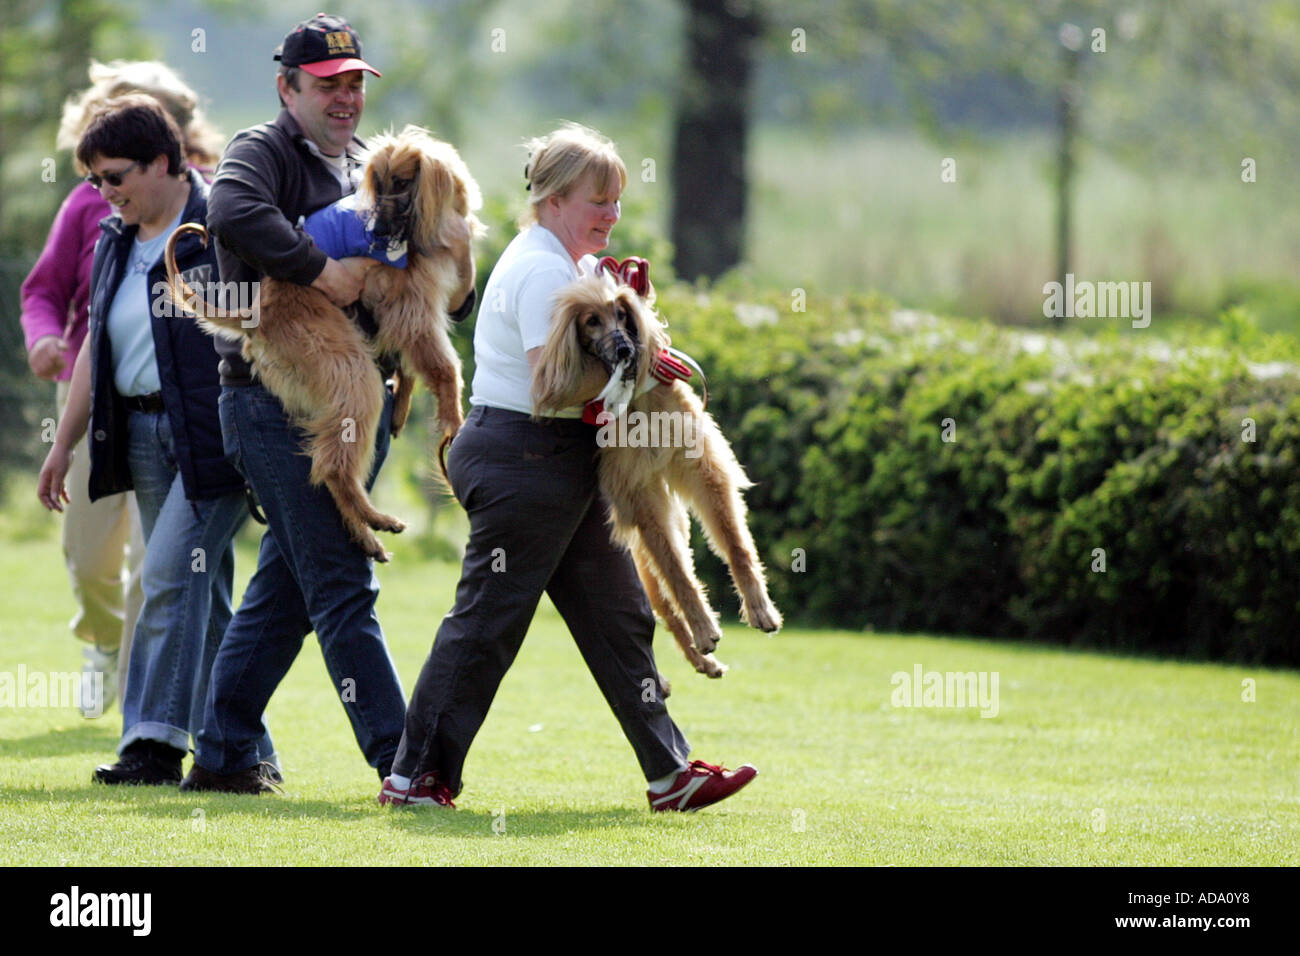 Afghanistan Hound, Afghan Hound (Canis lupus f. familiaris), bearing up after the race to avoid biting, Germany Stock Photo